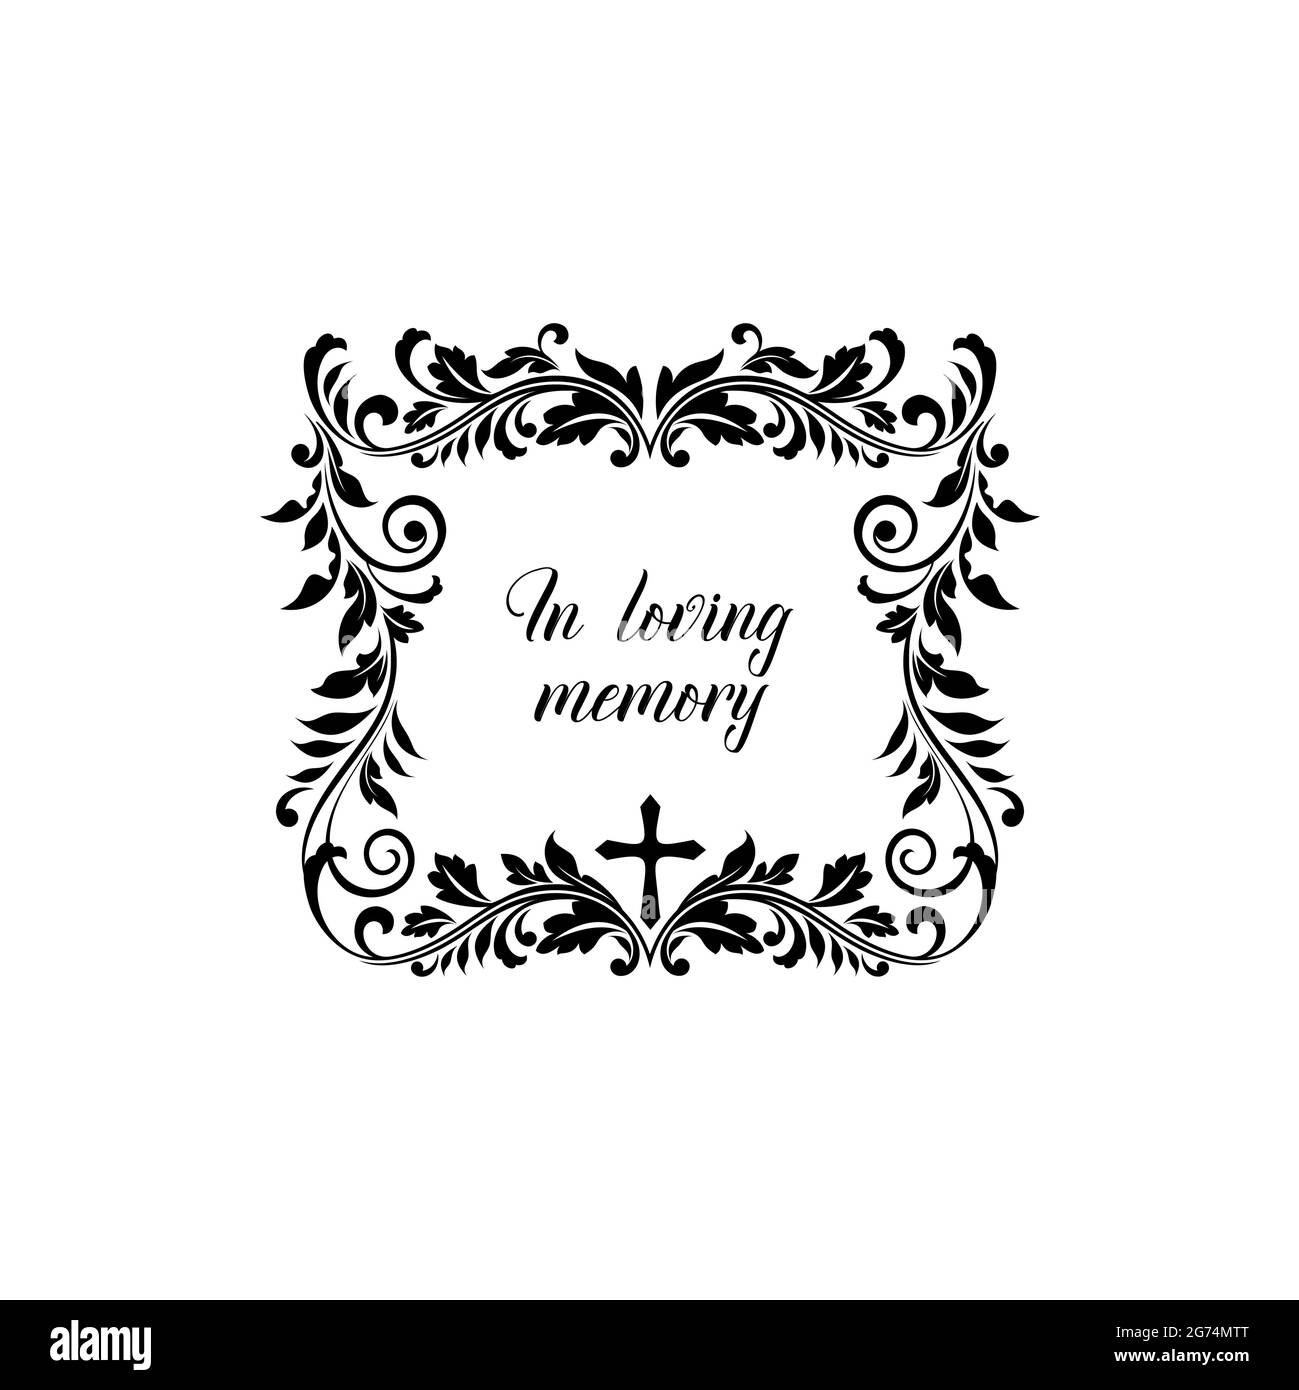 In loving memory condolence message on gravestone isolated lettering. Vector inscription on tombstone, floral border frame with vintage flower ornamen Stock Vector